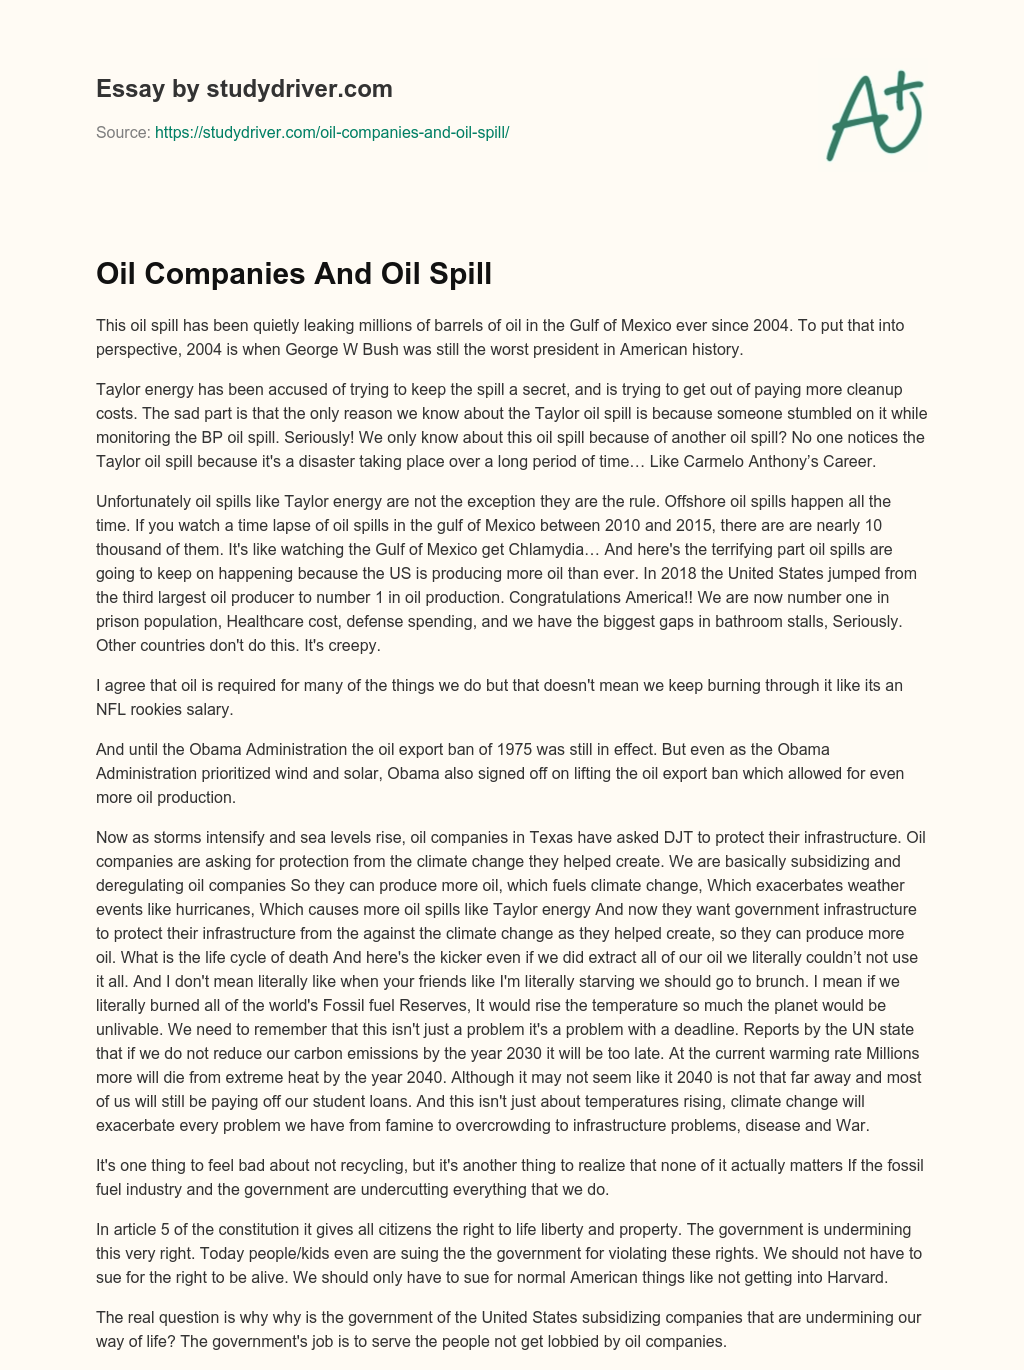 Oil Companies and Oil Spill essay